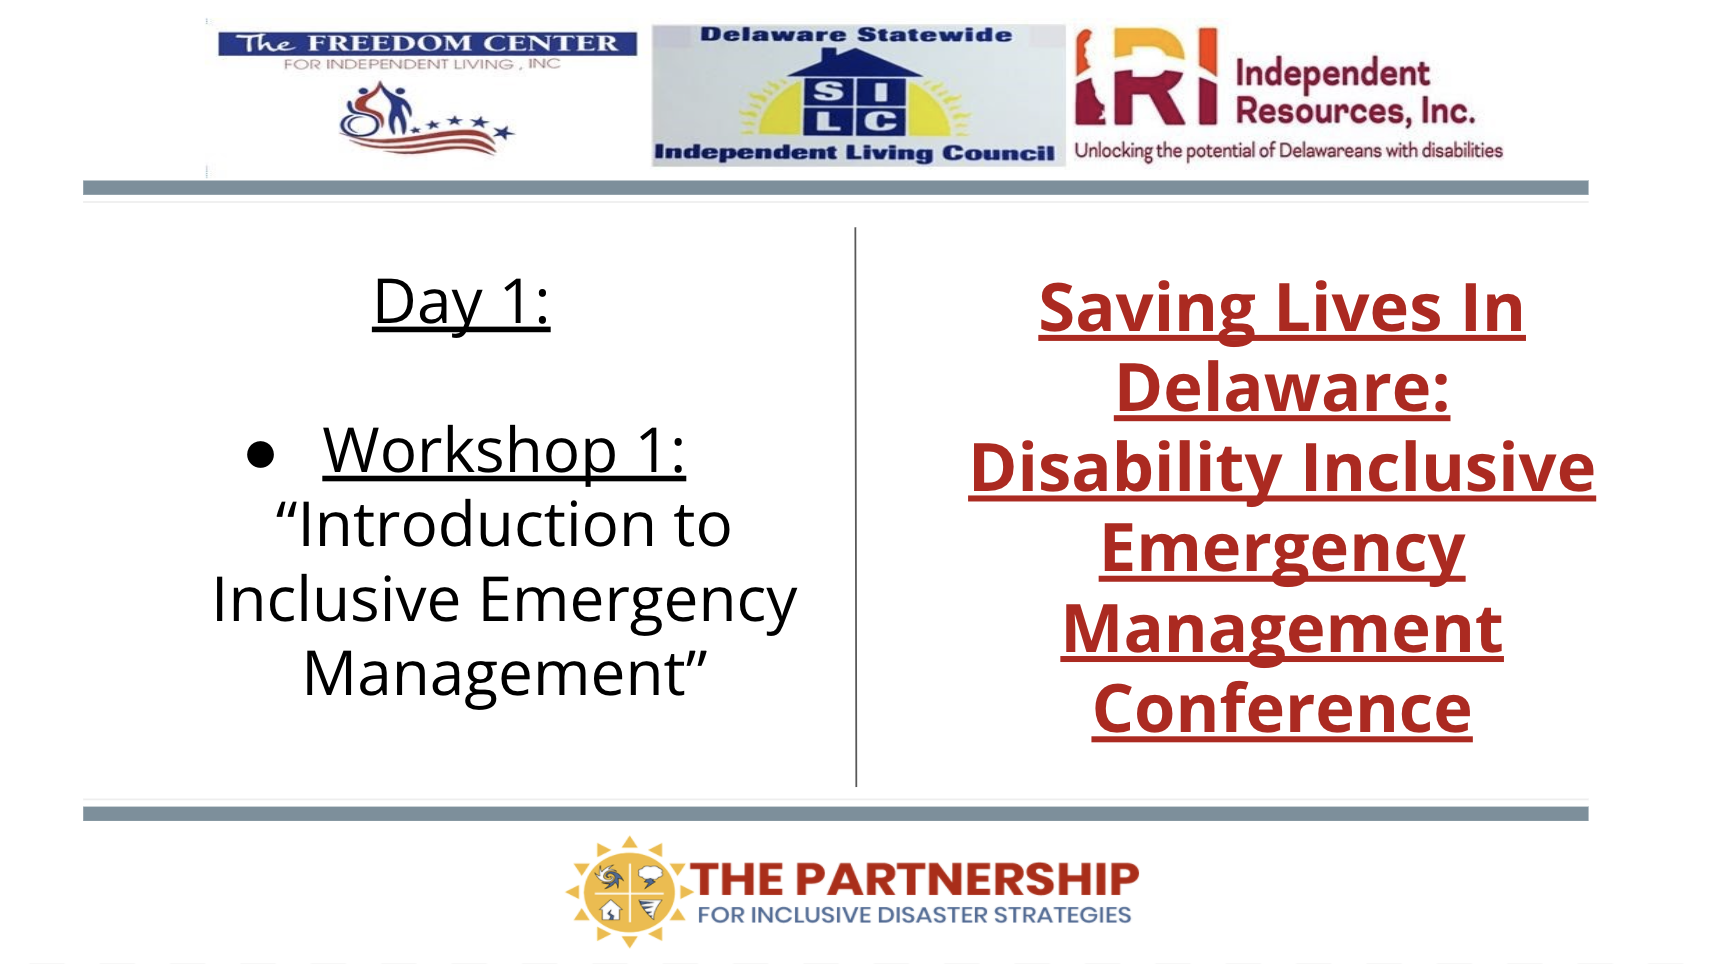 Image with the logos of The Partnership, FCIL, DE SILC, and IRI. Text reads "Day 1" and "Workshop 1, Introduction to Inclusive Emergency Management”